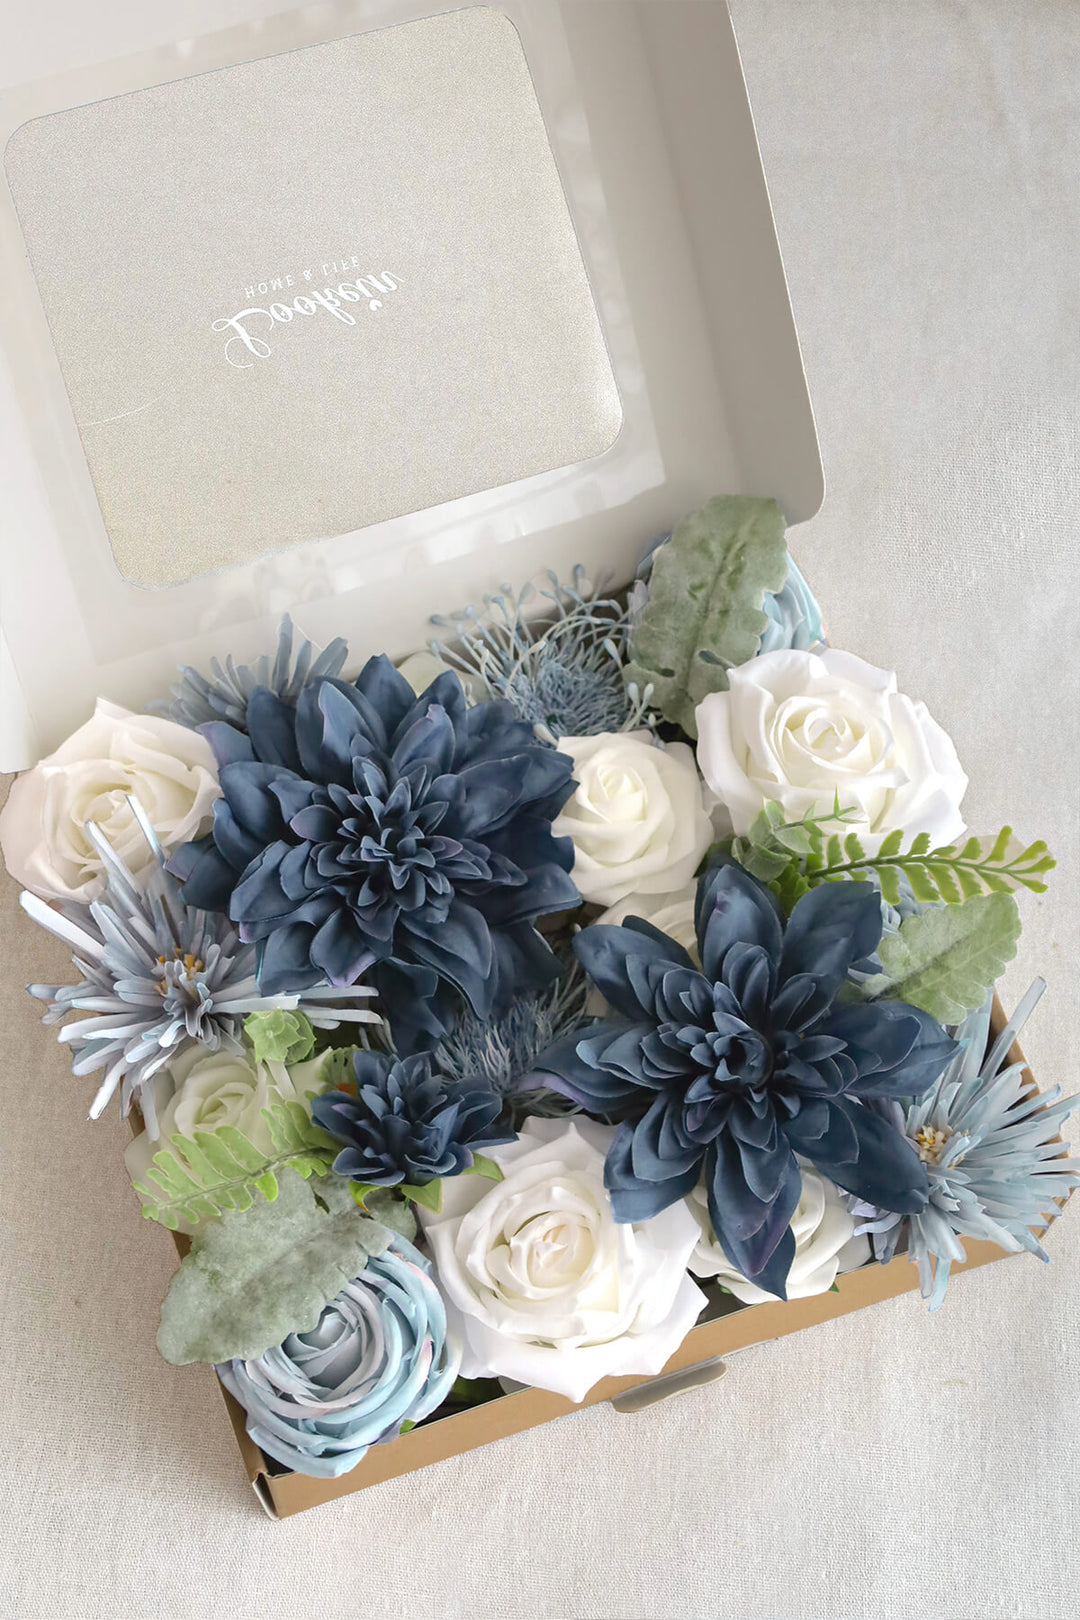 The Best Dusty Blue Wedding Flower Stems for Your Bouquet